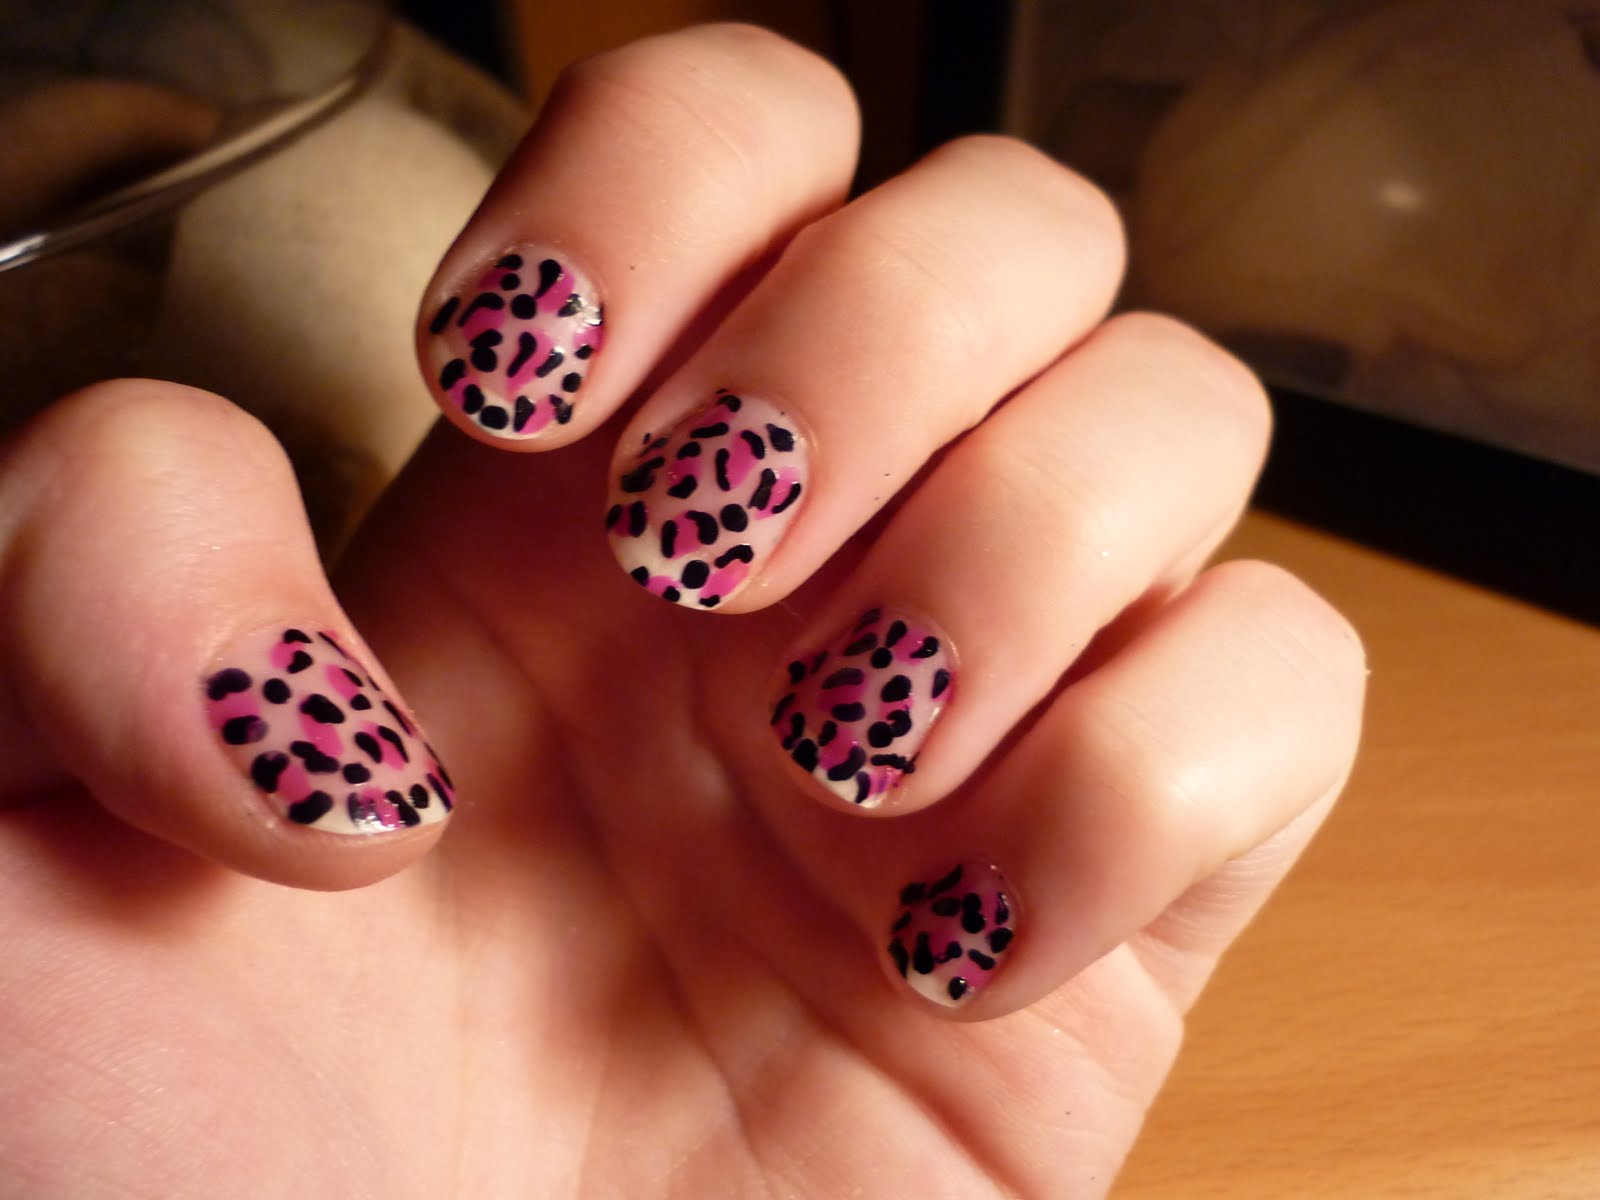 3. New Nail Design Ideas - wide 3